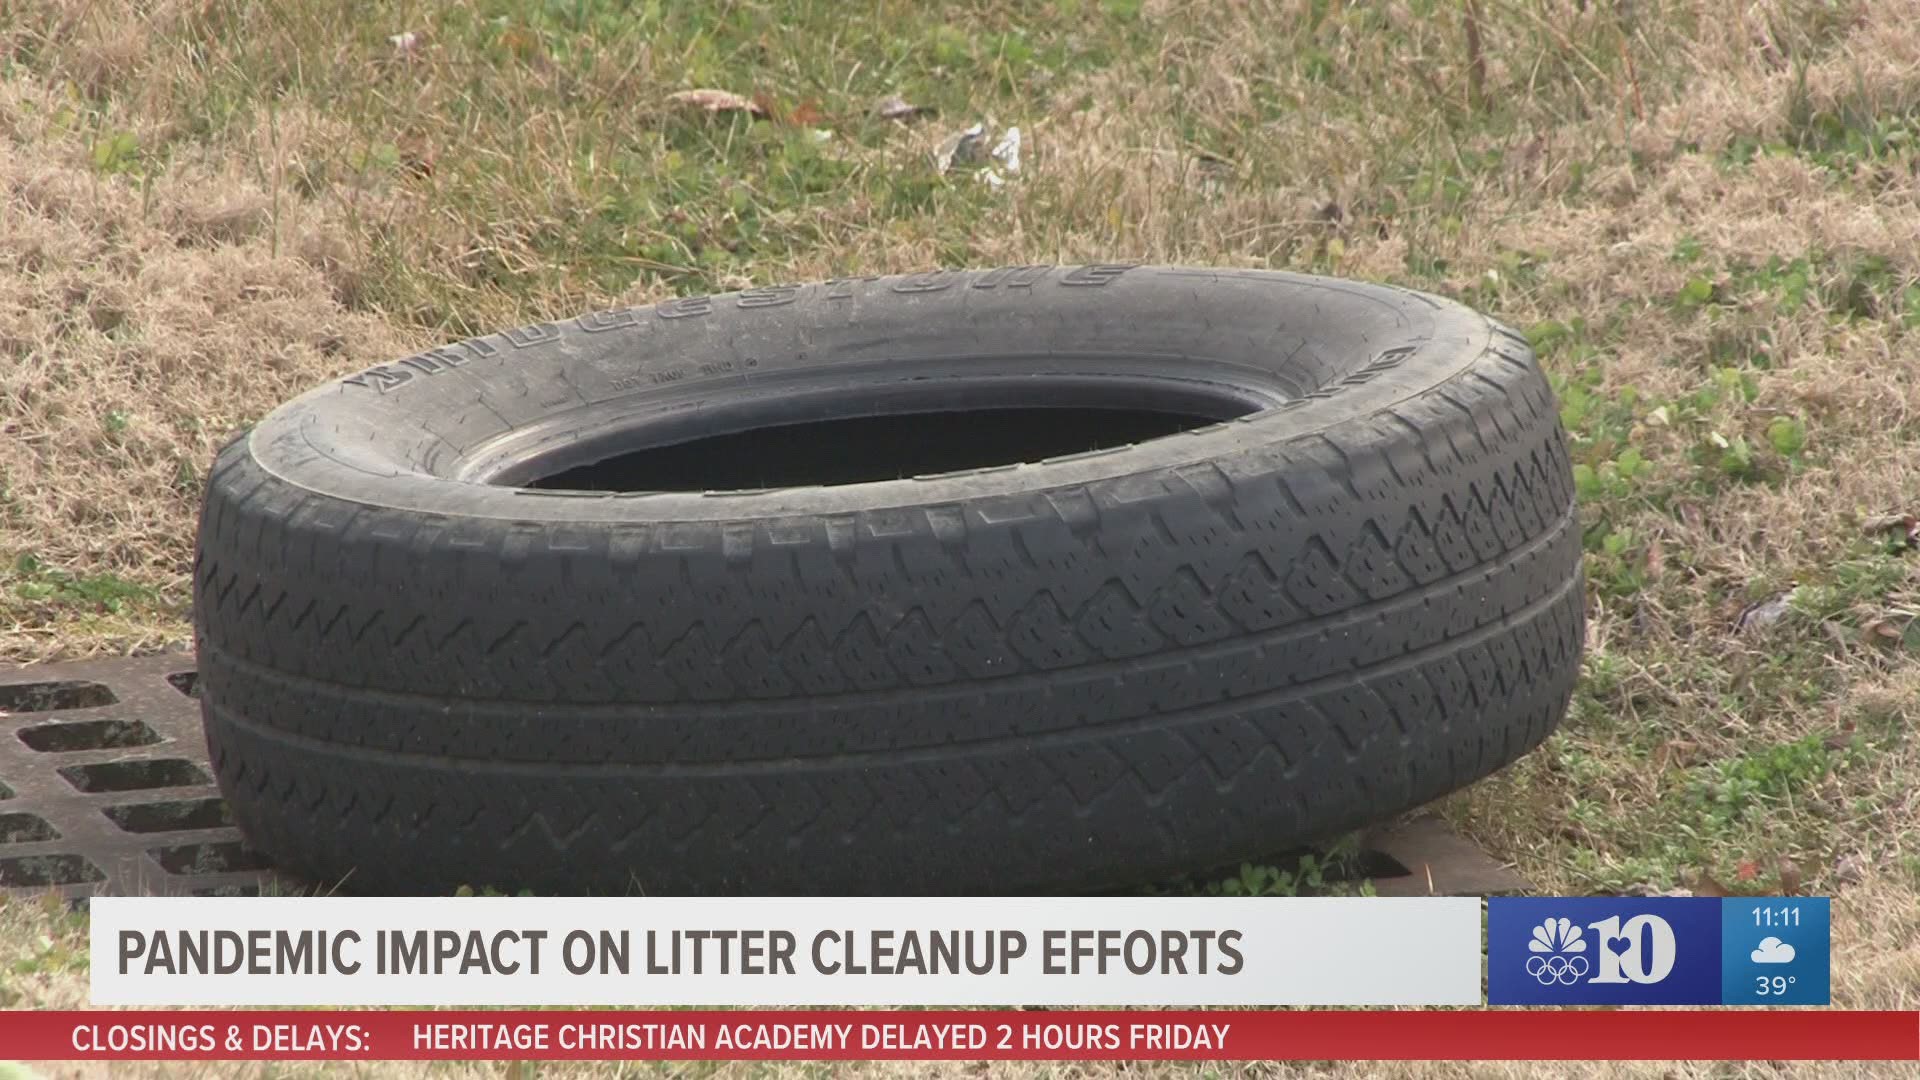 Officials said that litter could be more visible because there is not enough foliage to cover it up, and because the city has not been able to take litter crews out.